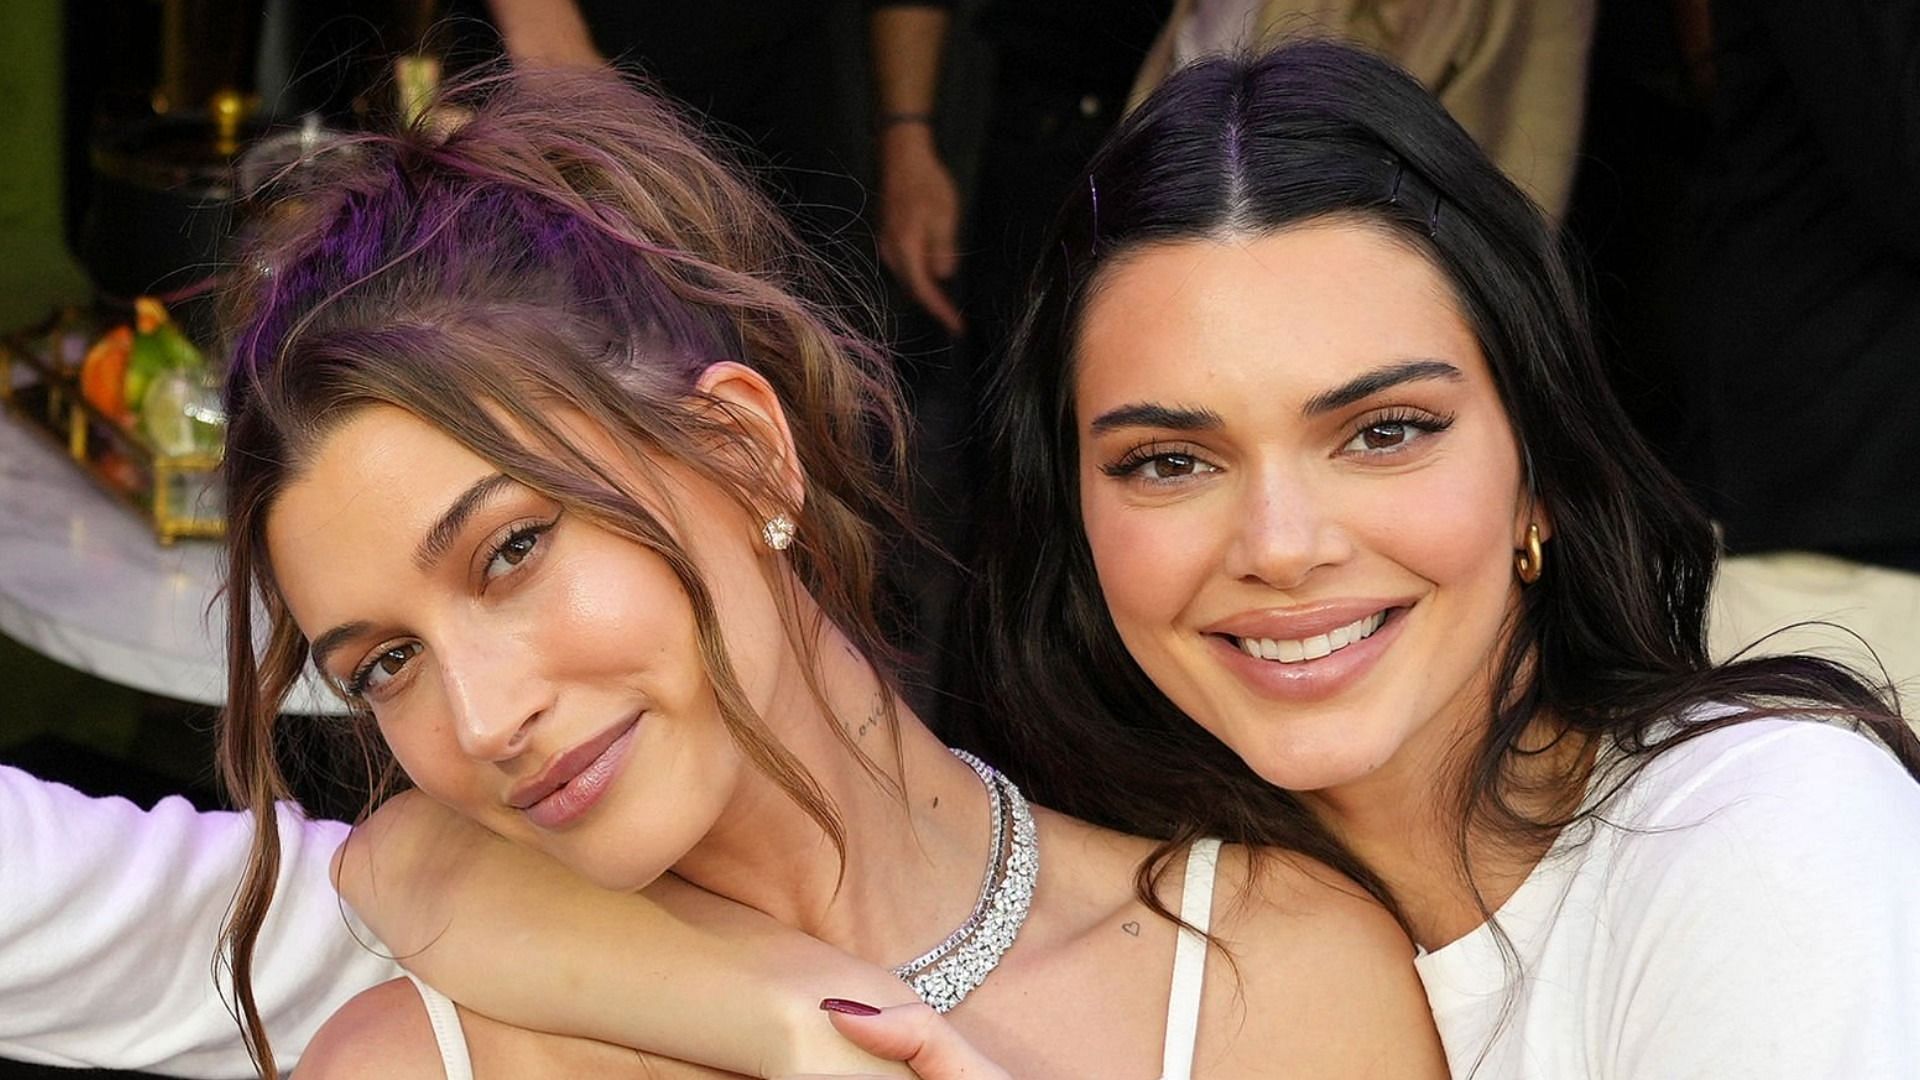 Kendall Jenner and Hailey Bieber were seen receiving NAD therapy during the latest episode of The Kardashians (Image via Kevin Mazur/Getty Images)